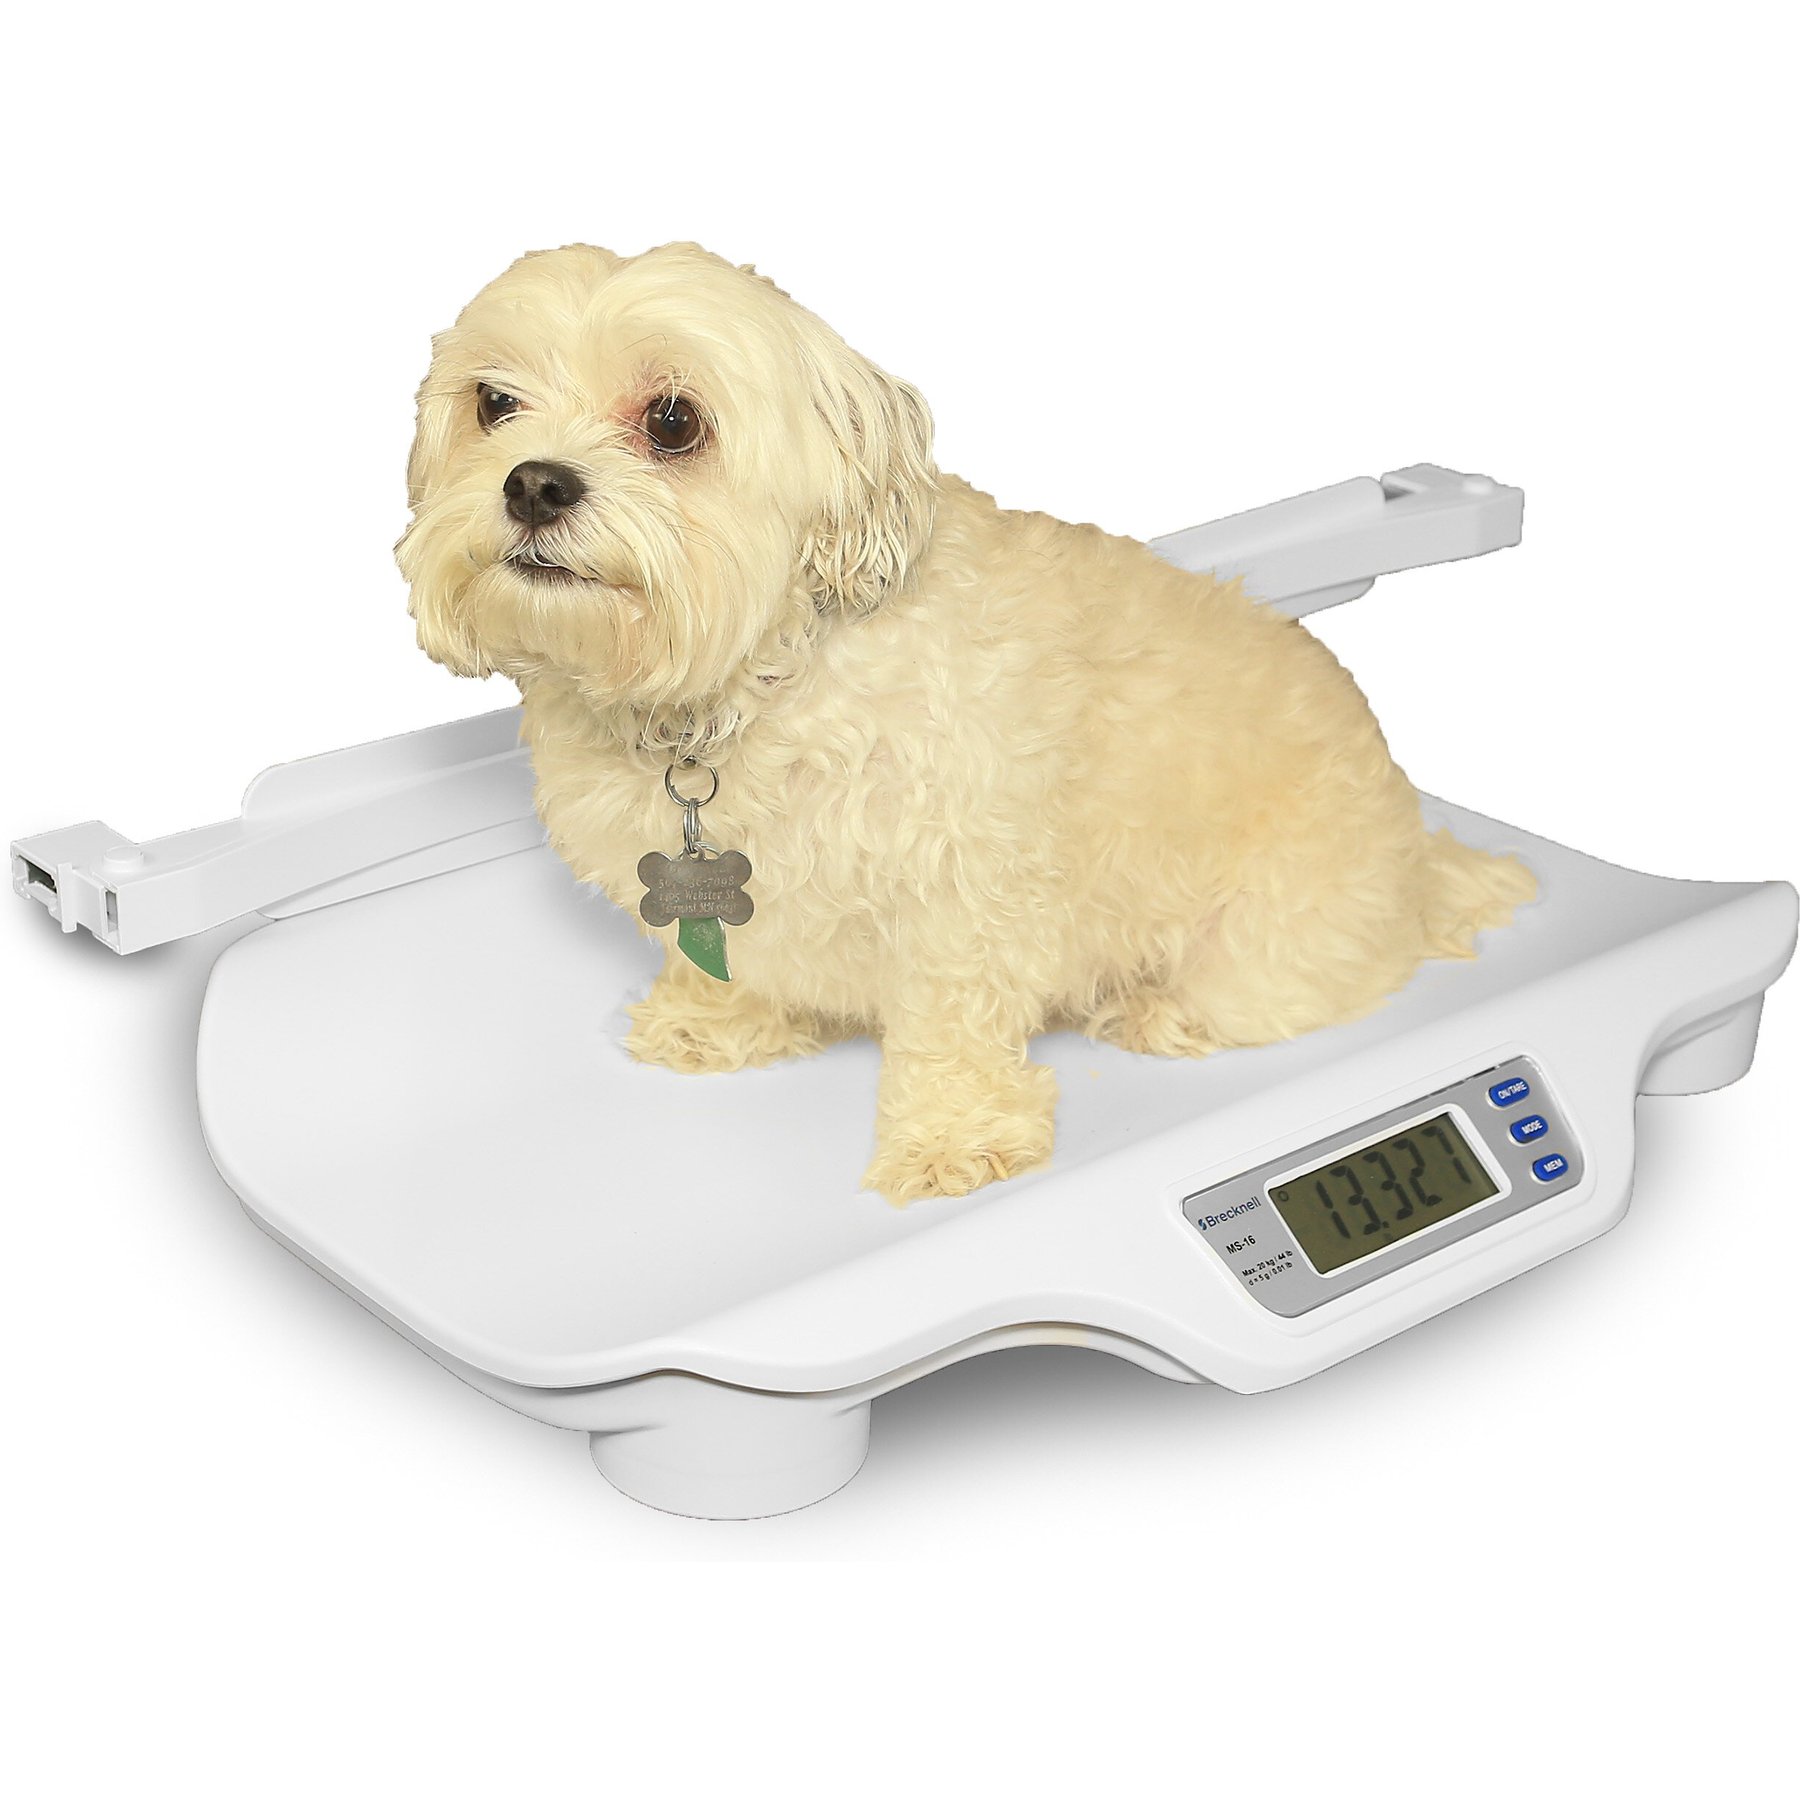 Brecknell MS-20S Veterinary Scale